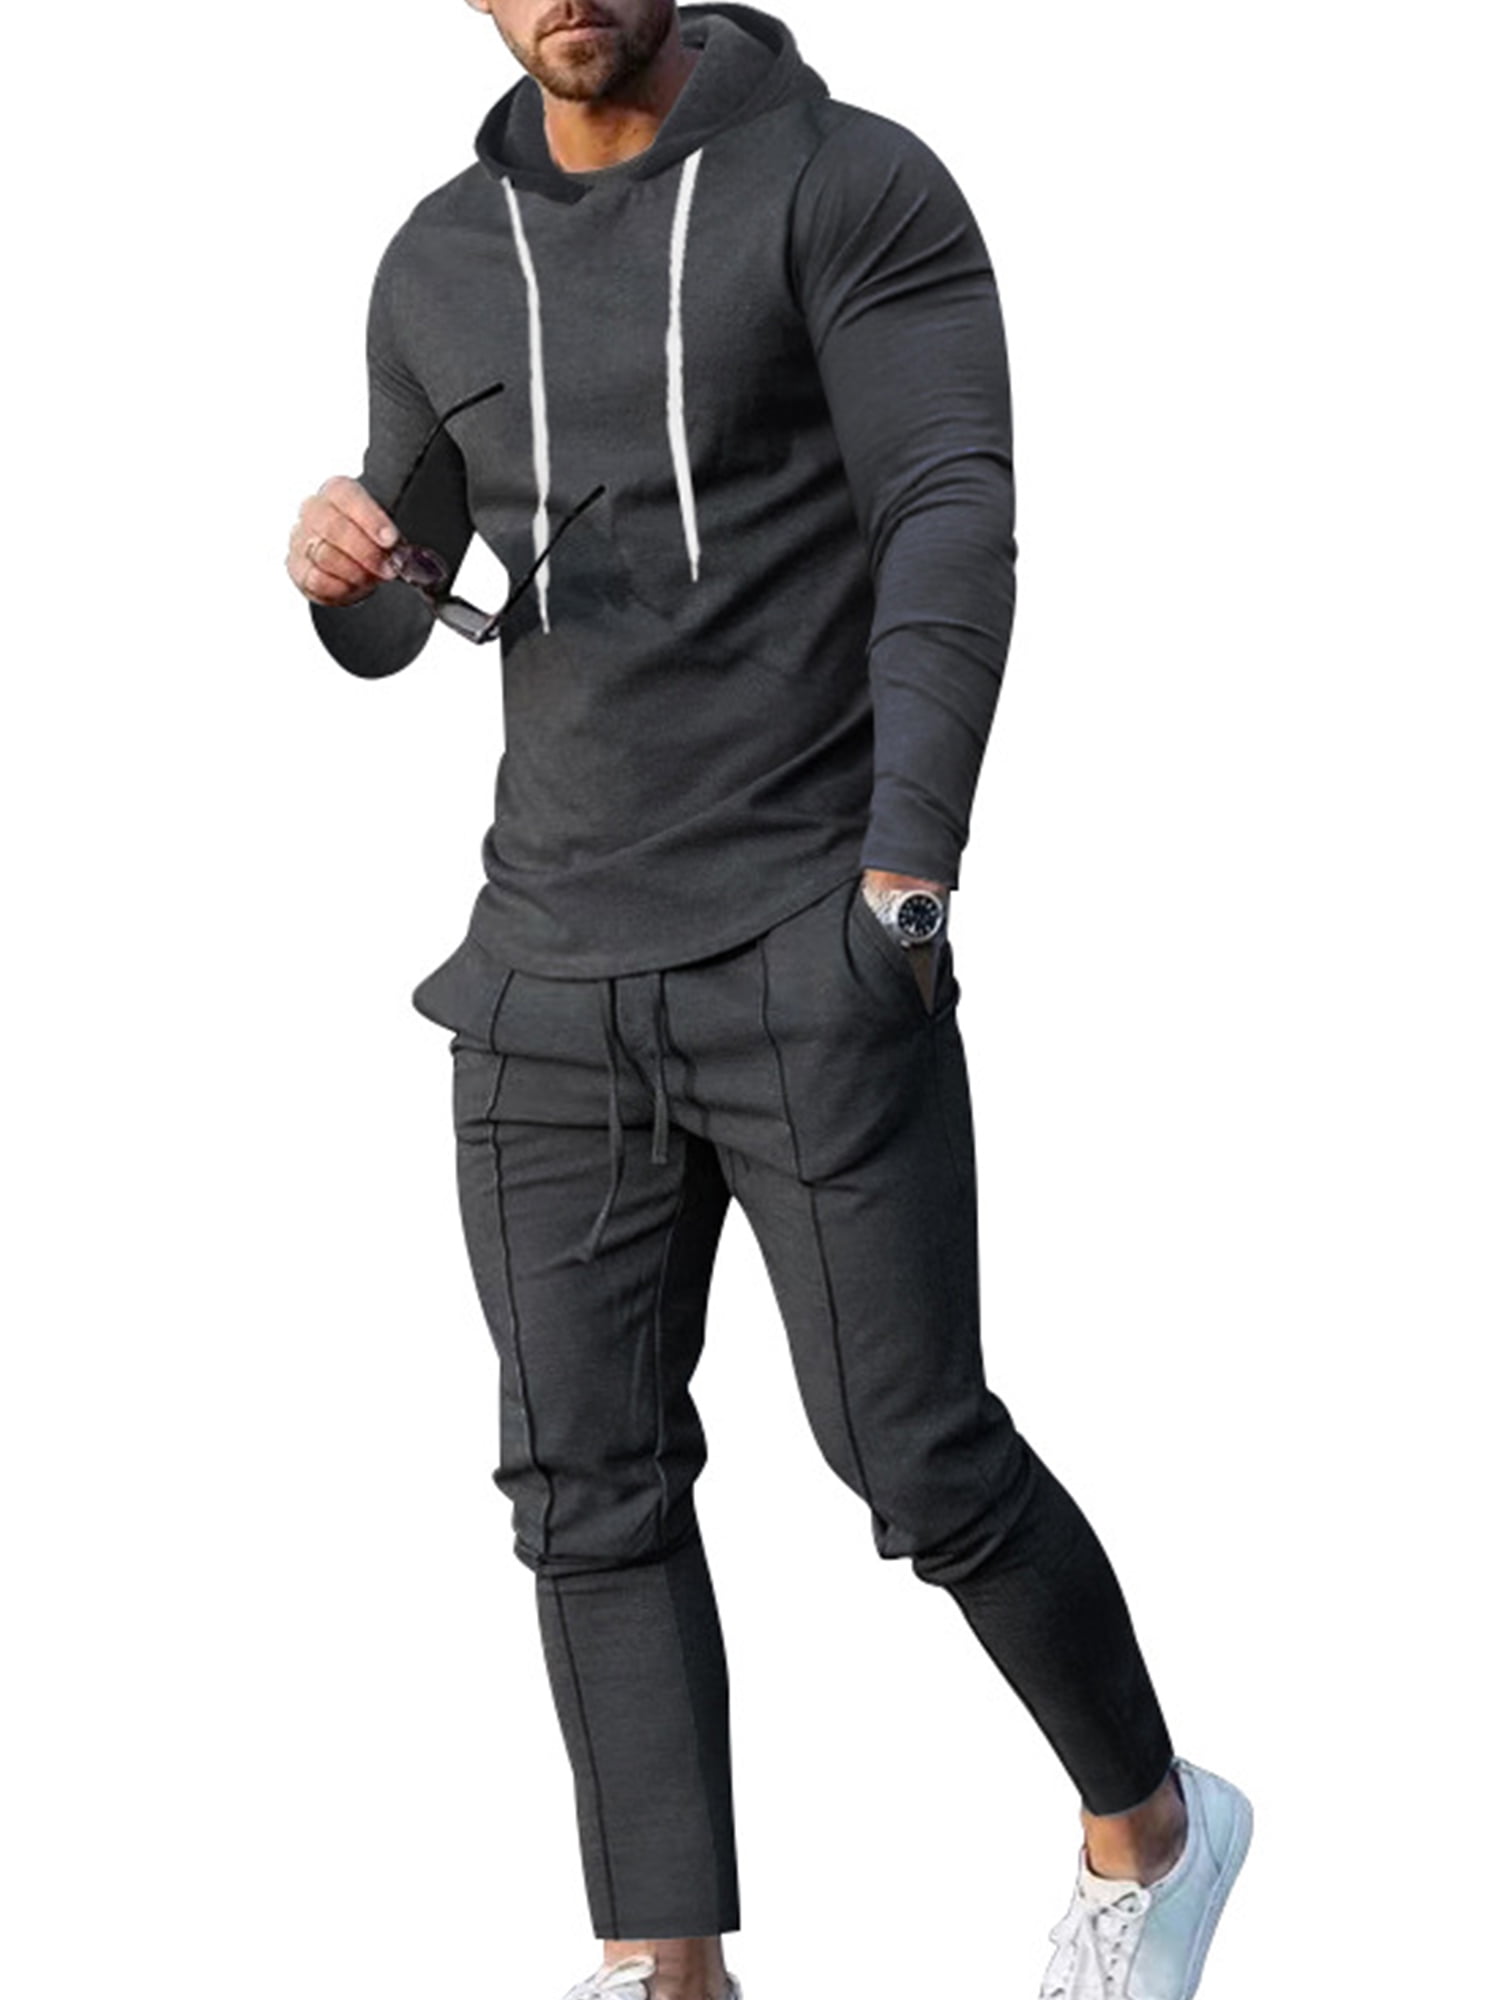 Frontwalk Men's Jogger Sets Hooded Sweatshirts+Pant Outfits Two Pieces ...